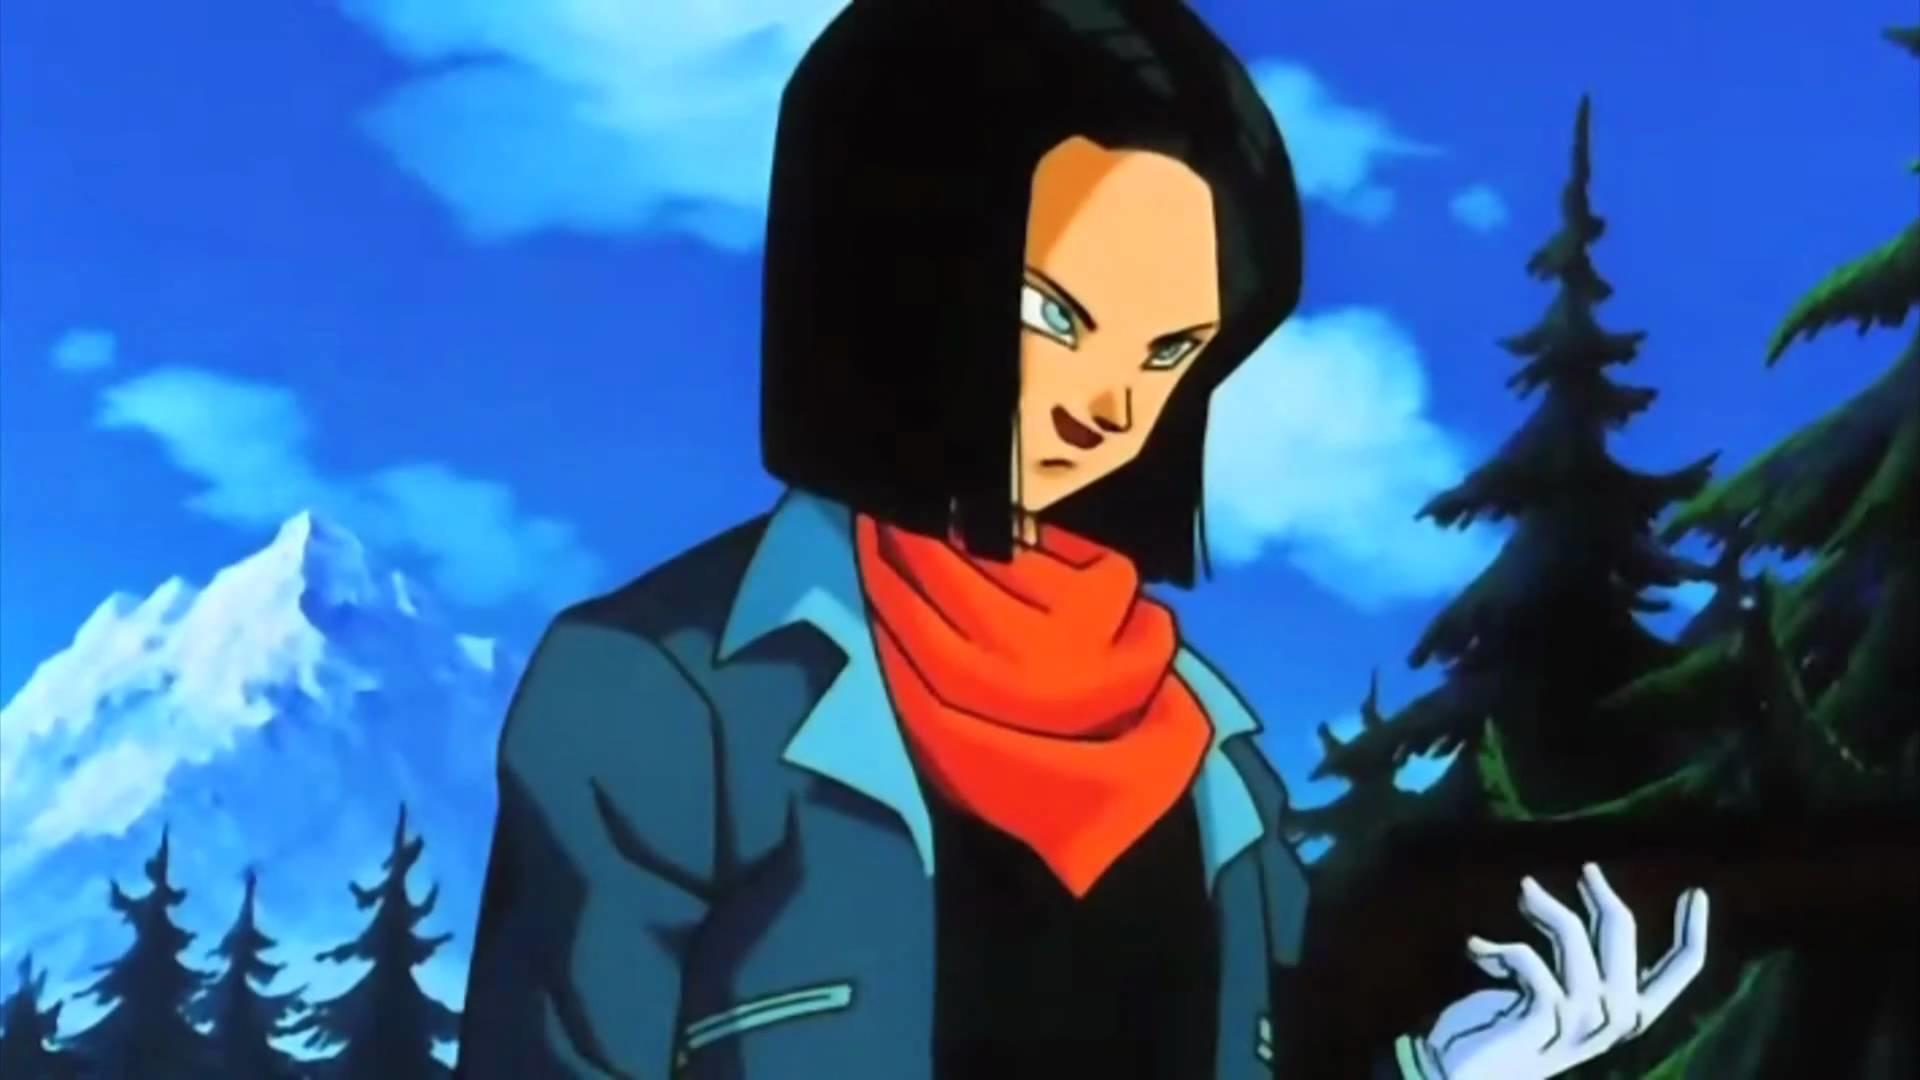 Android 17 (Character) - Giant Bomb